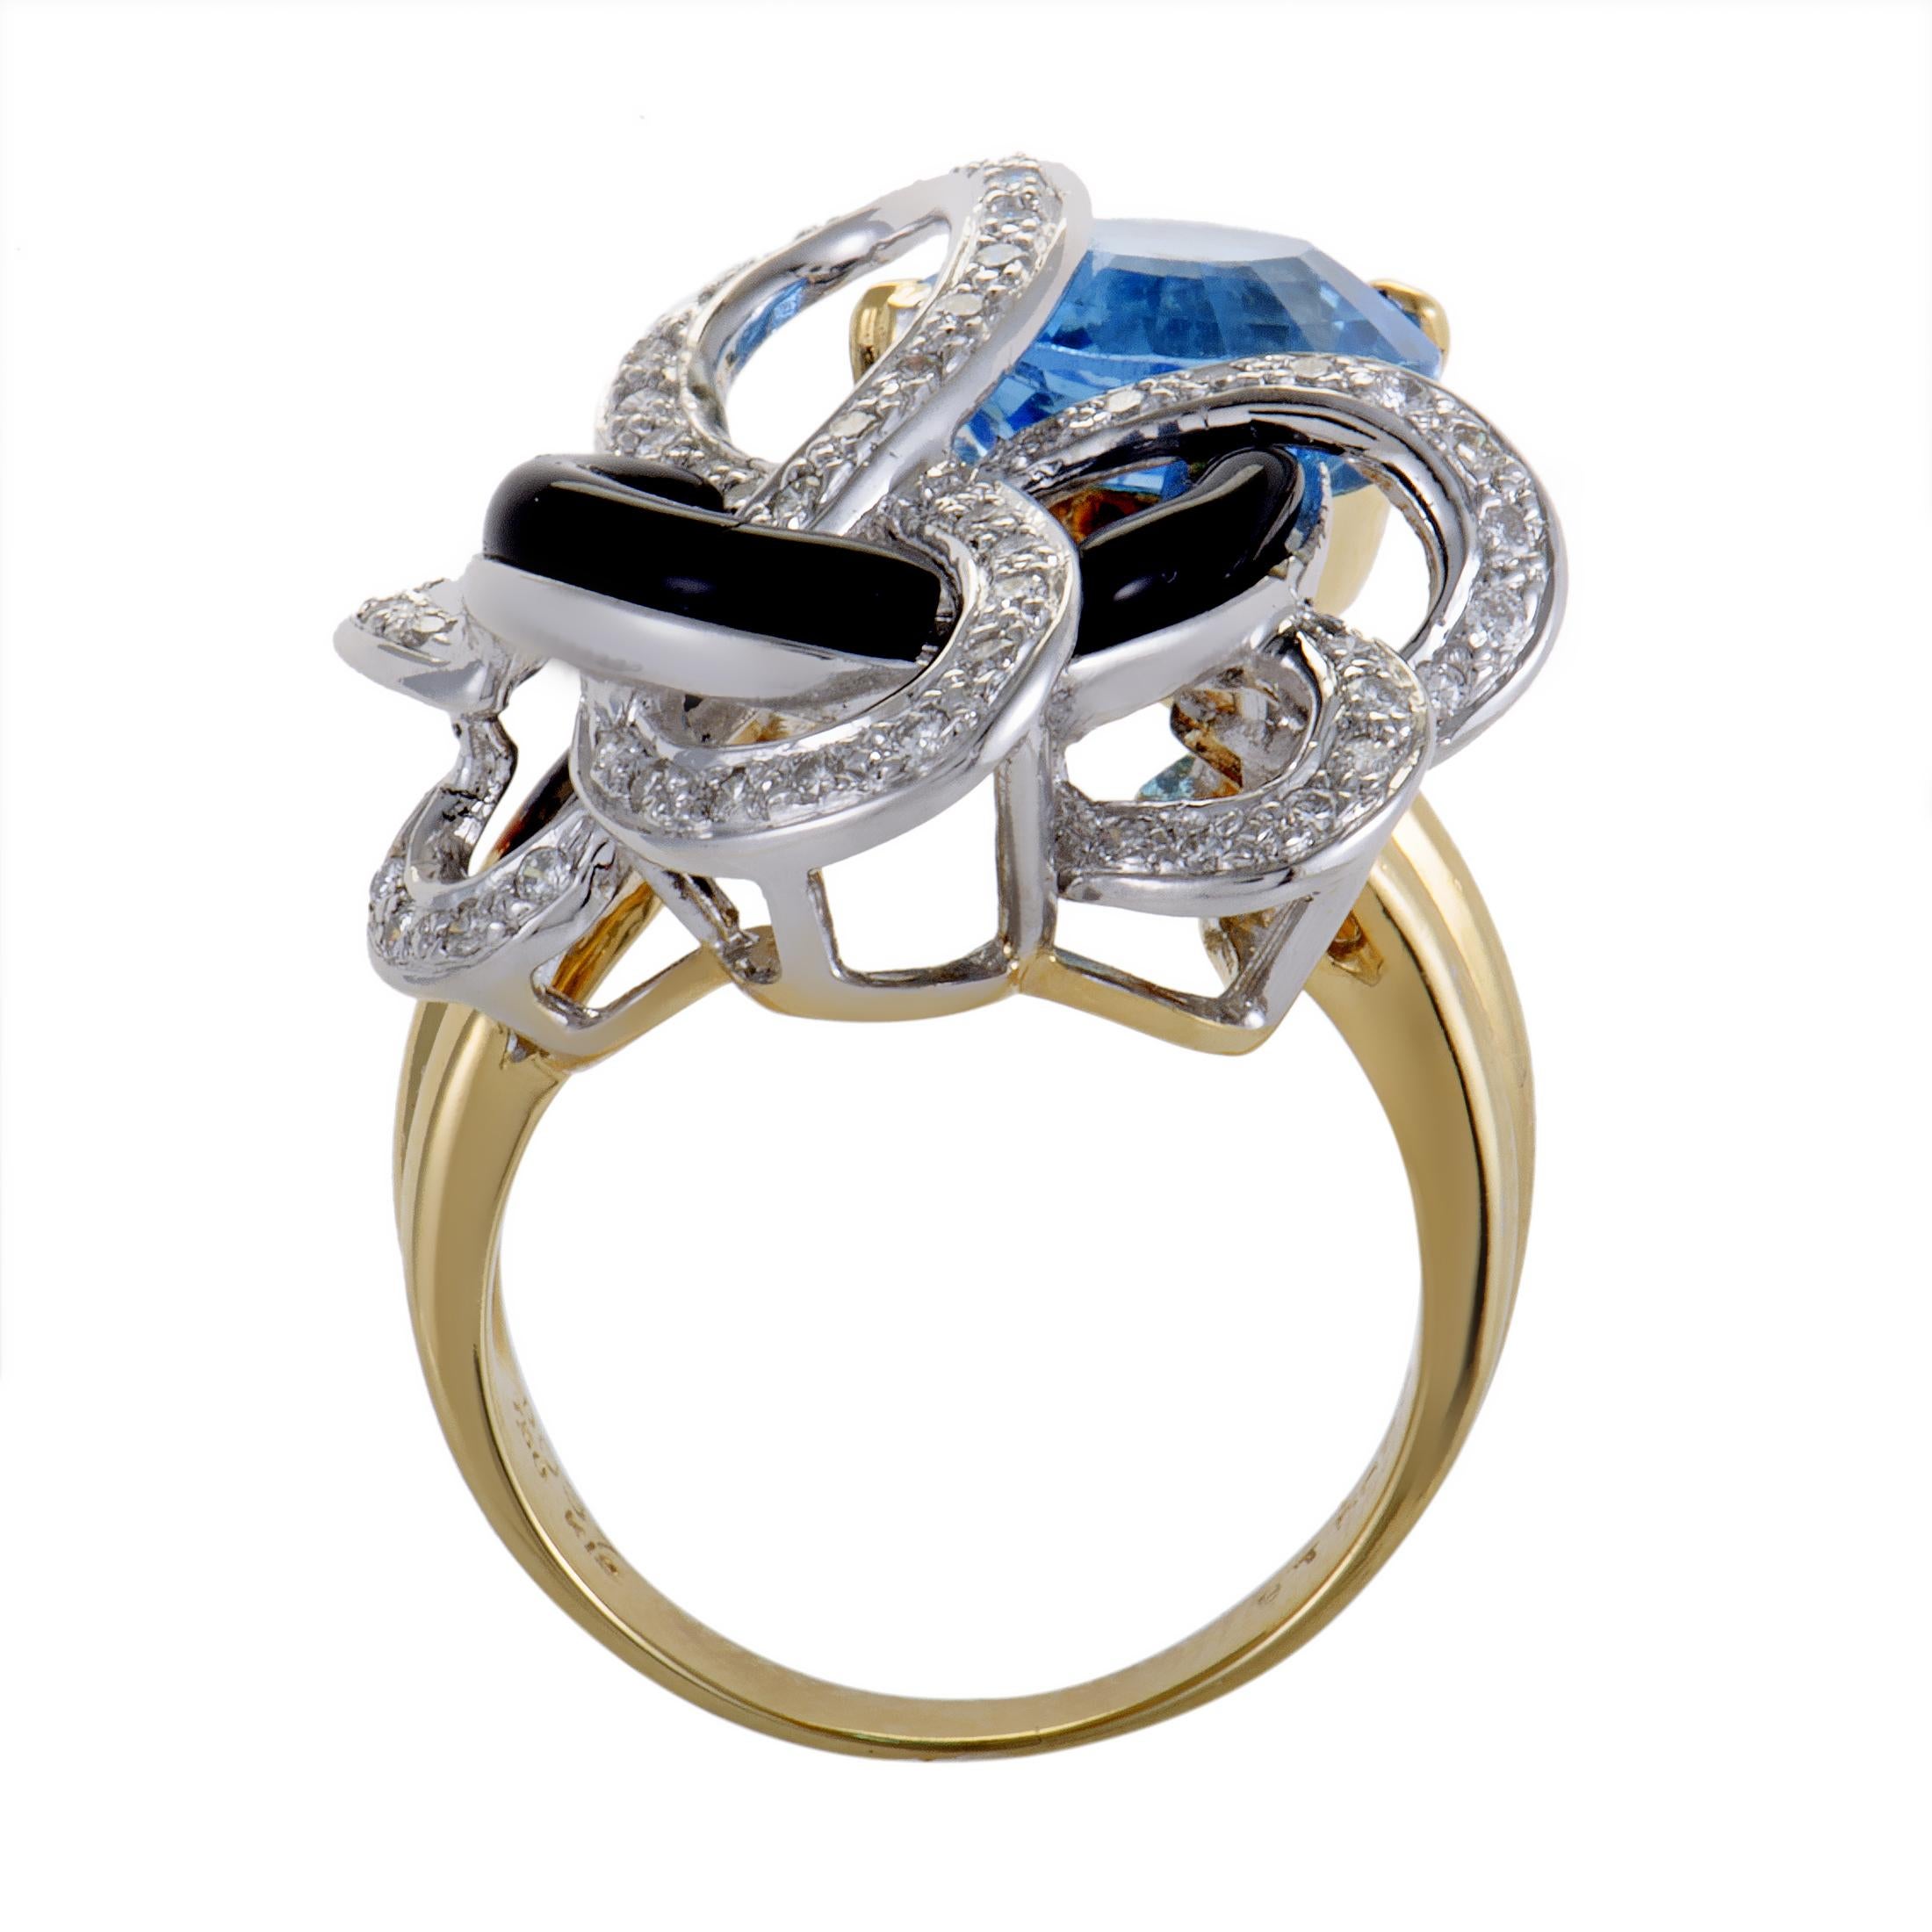 This delightful gem-set ring is perfect for a stylish lady. The ring is made of 18K yellow and white gold and boasts an avant-garde design featuring white diamonds, blue topaz, and black onyx. Absolutely stunning!
